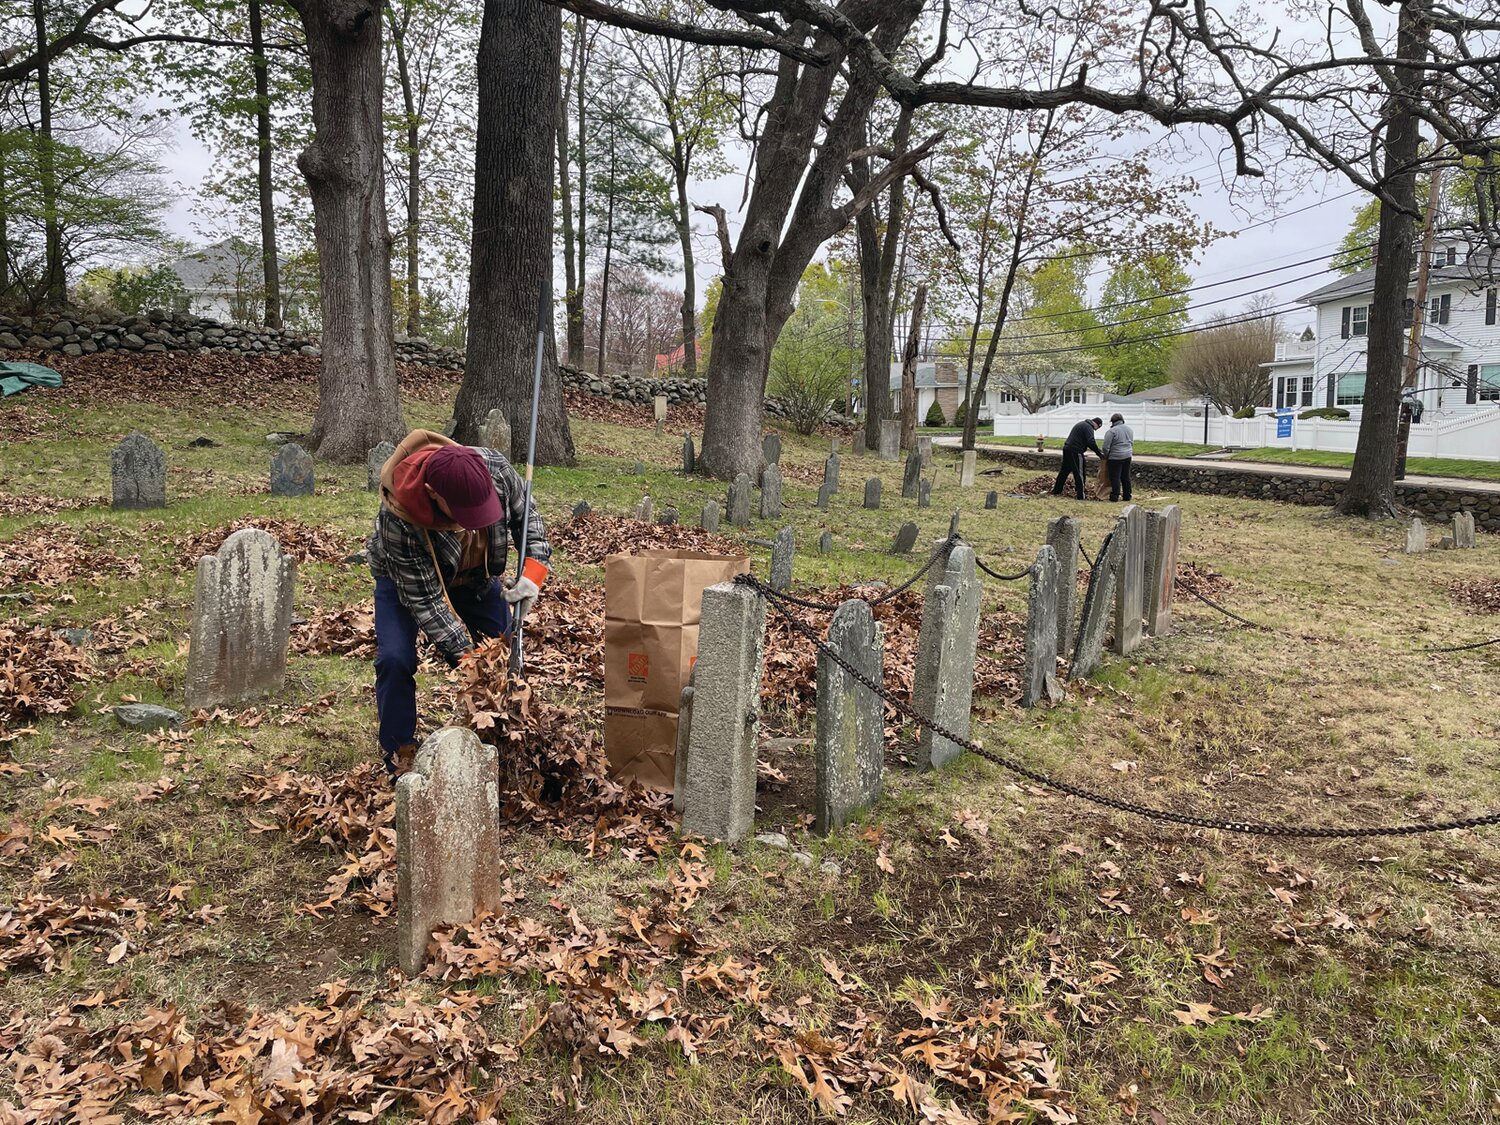 The Johnston Historical Society sponsored a cemetery clean-up last weekend as part of the annual Statewide Historical Cemetery Awareness Event. The Society spruced up the Gov. Samuel Ward King Cemetery, JN21, at the corner of Hartford Avenue and Winfield Road. For more information on the Johnston Historical Society, call them at 401-231-3380. (Photos courtesy Christopher Martin)